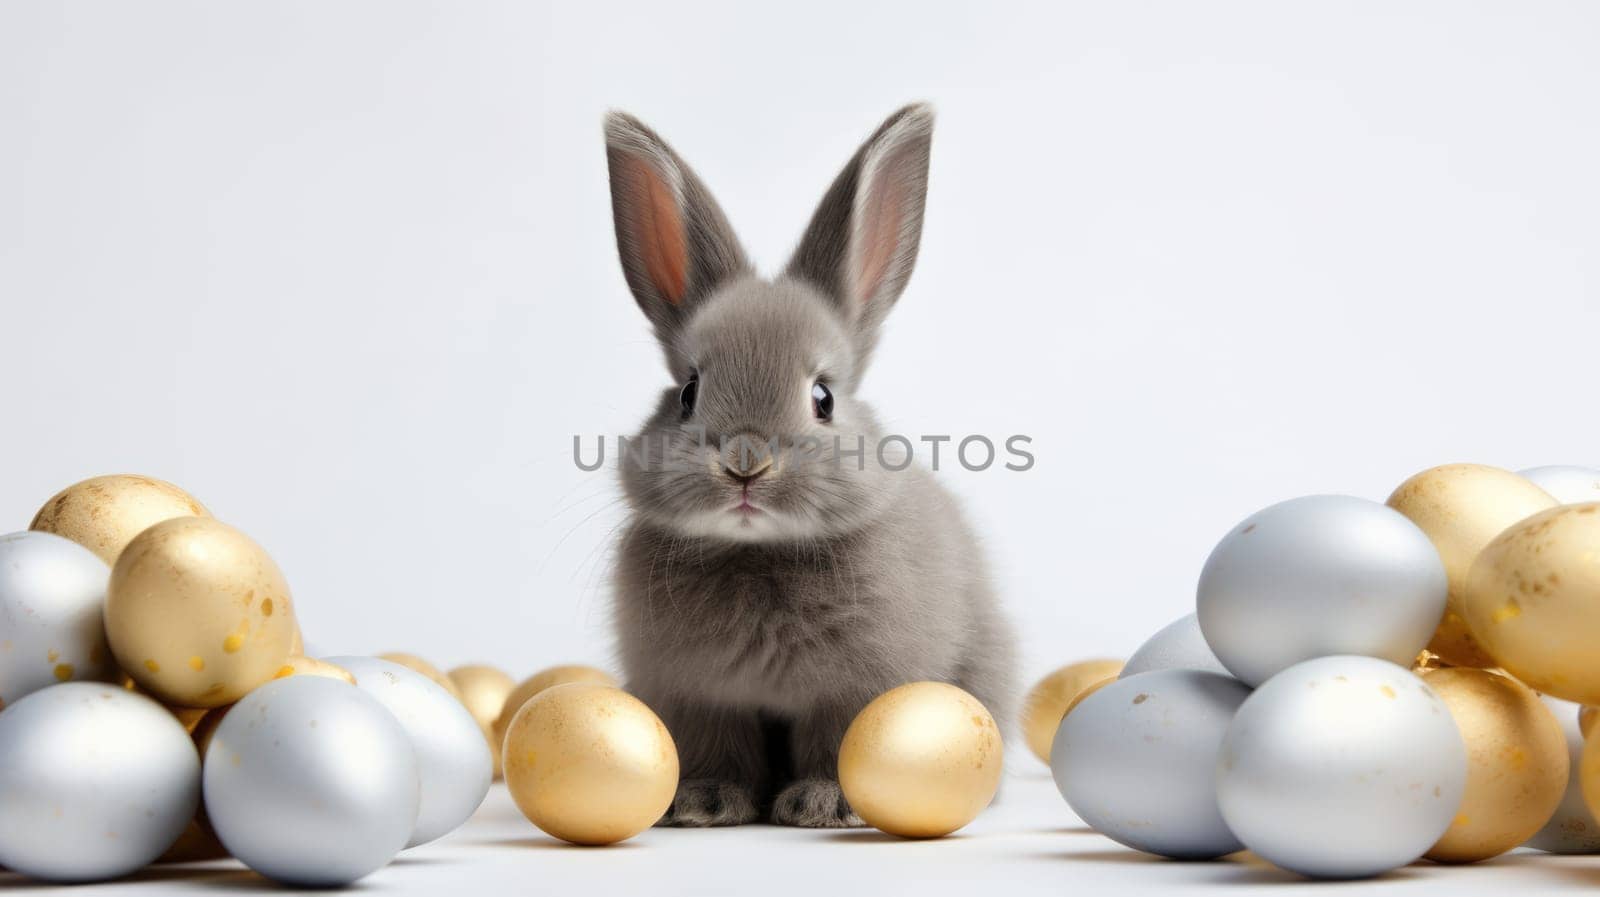 Small gray rabbit sits between shiny gold and silver Easter eggs on white background by JuliaDorian